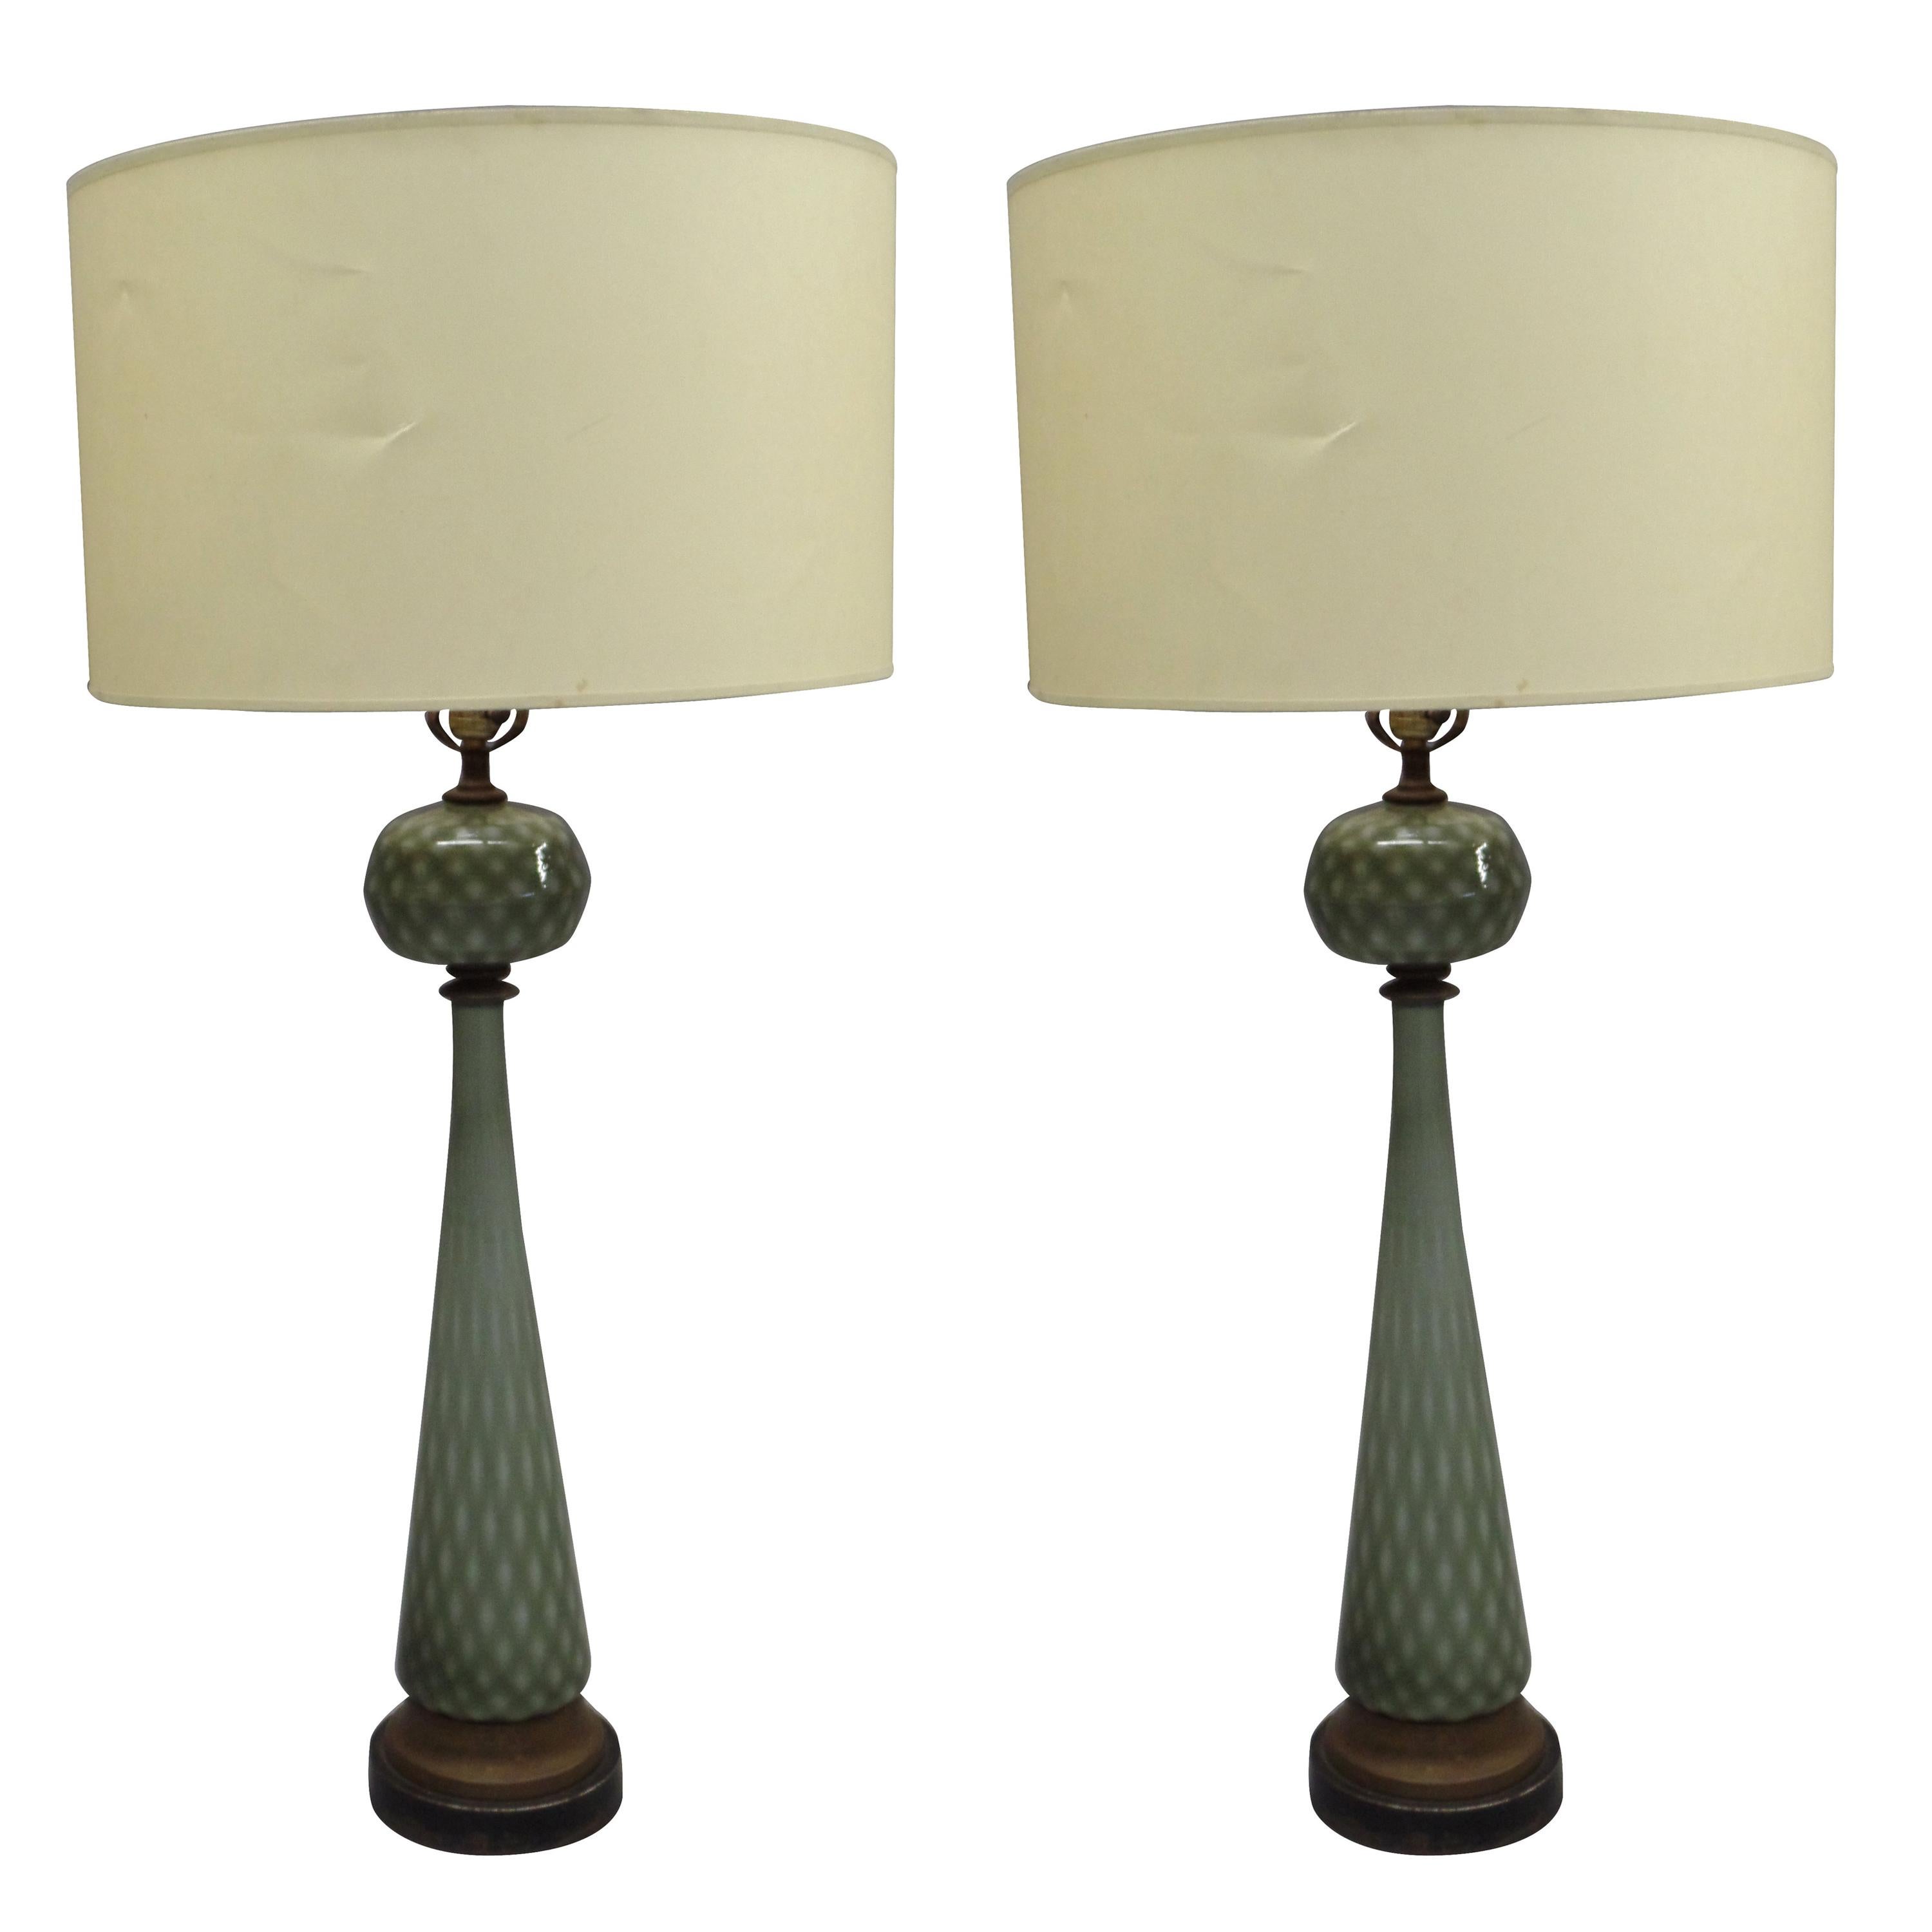 Pair of Large Mid-Century Modern Neoclassical Murano/Venetian Glass Table Lamps